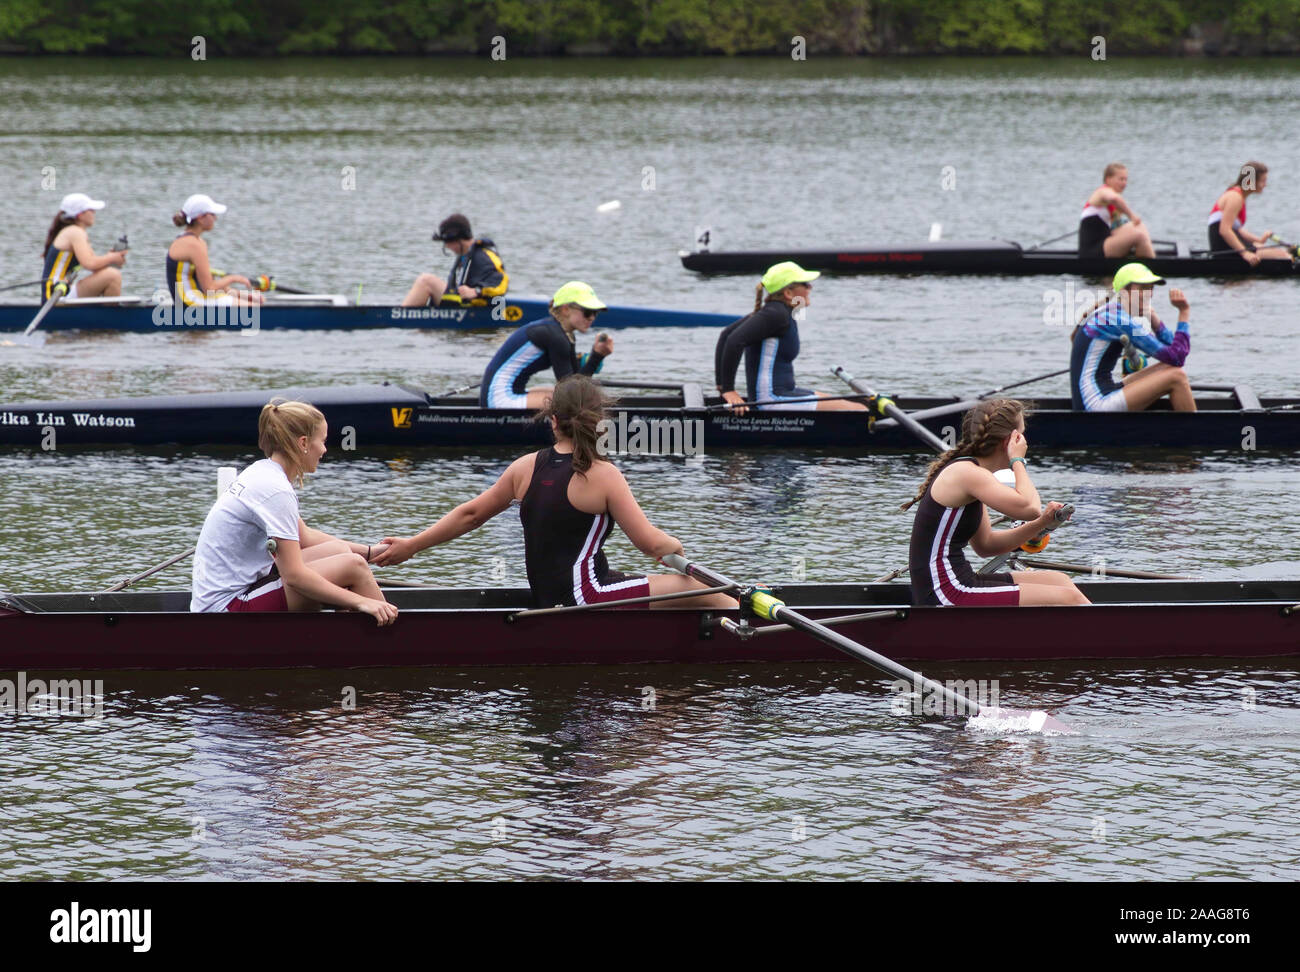 New Preston, CT USA. May 2016. Crew teammates giving a handshake after a grueling race. Stock Photo